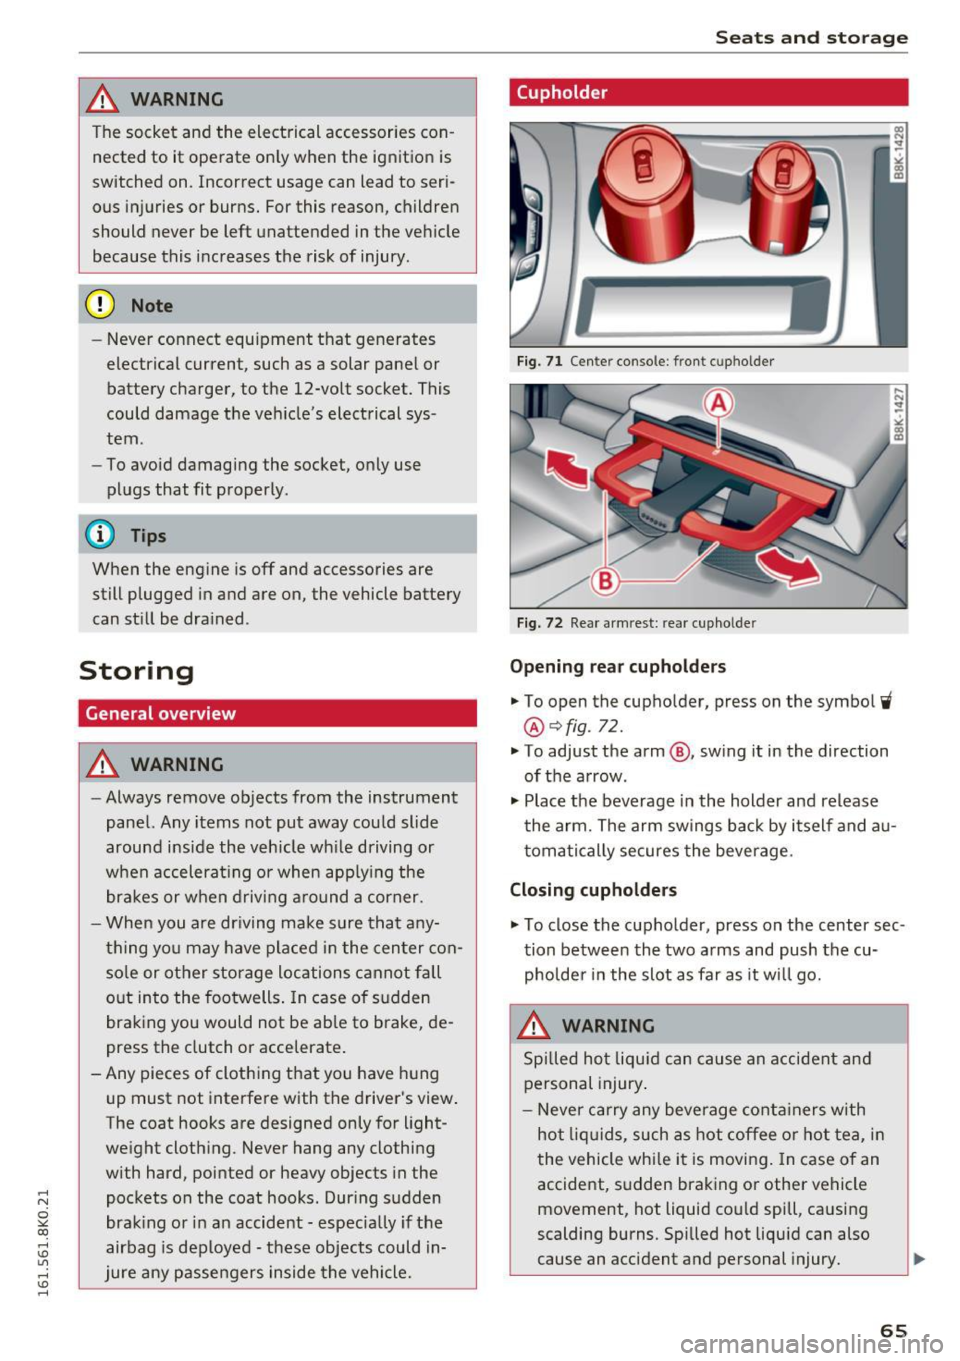 AUDI A4 2016  Owners Manual ,...., 
N 
0 
"" CX) ,...., 
I.Cl U"I ,...., 
I.Cl ,...., 
/! WARNING 
The  socket  and  the  electrical  accessories  con­
nected  to  it  operate  on ly when  the  ignition  is 
switched  on.  Inc